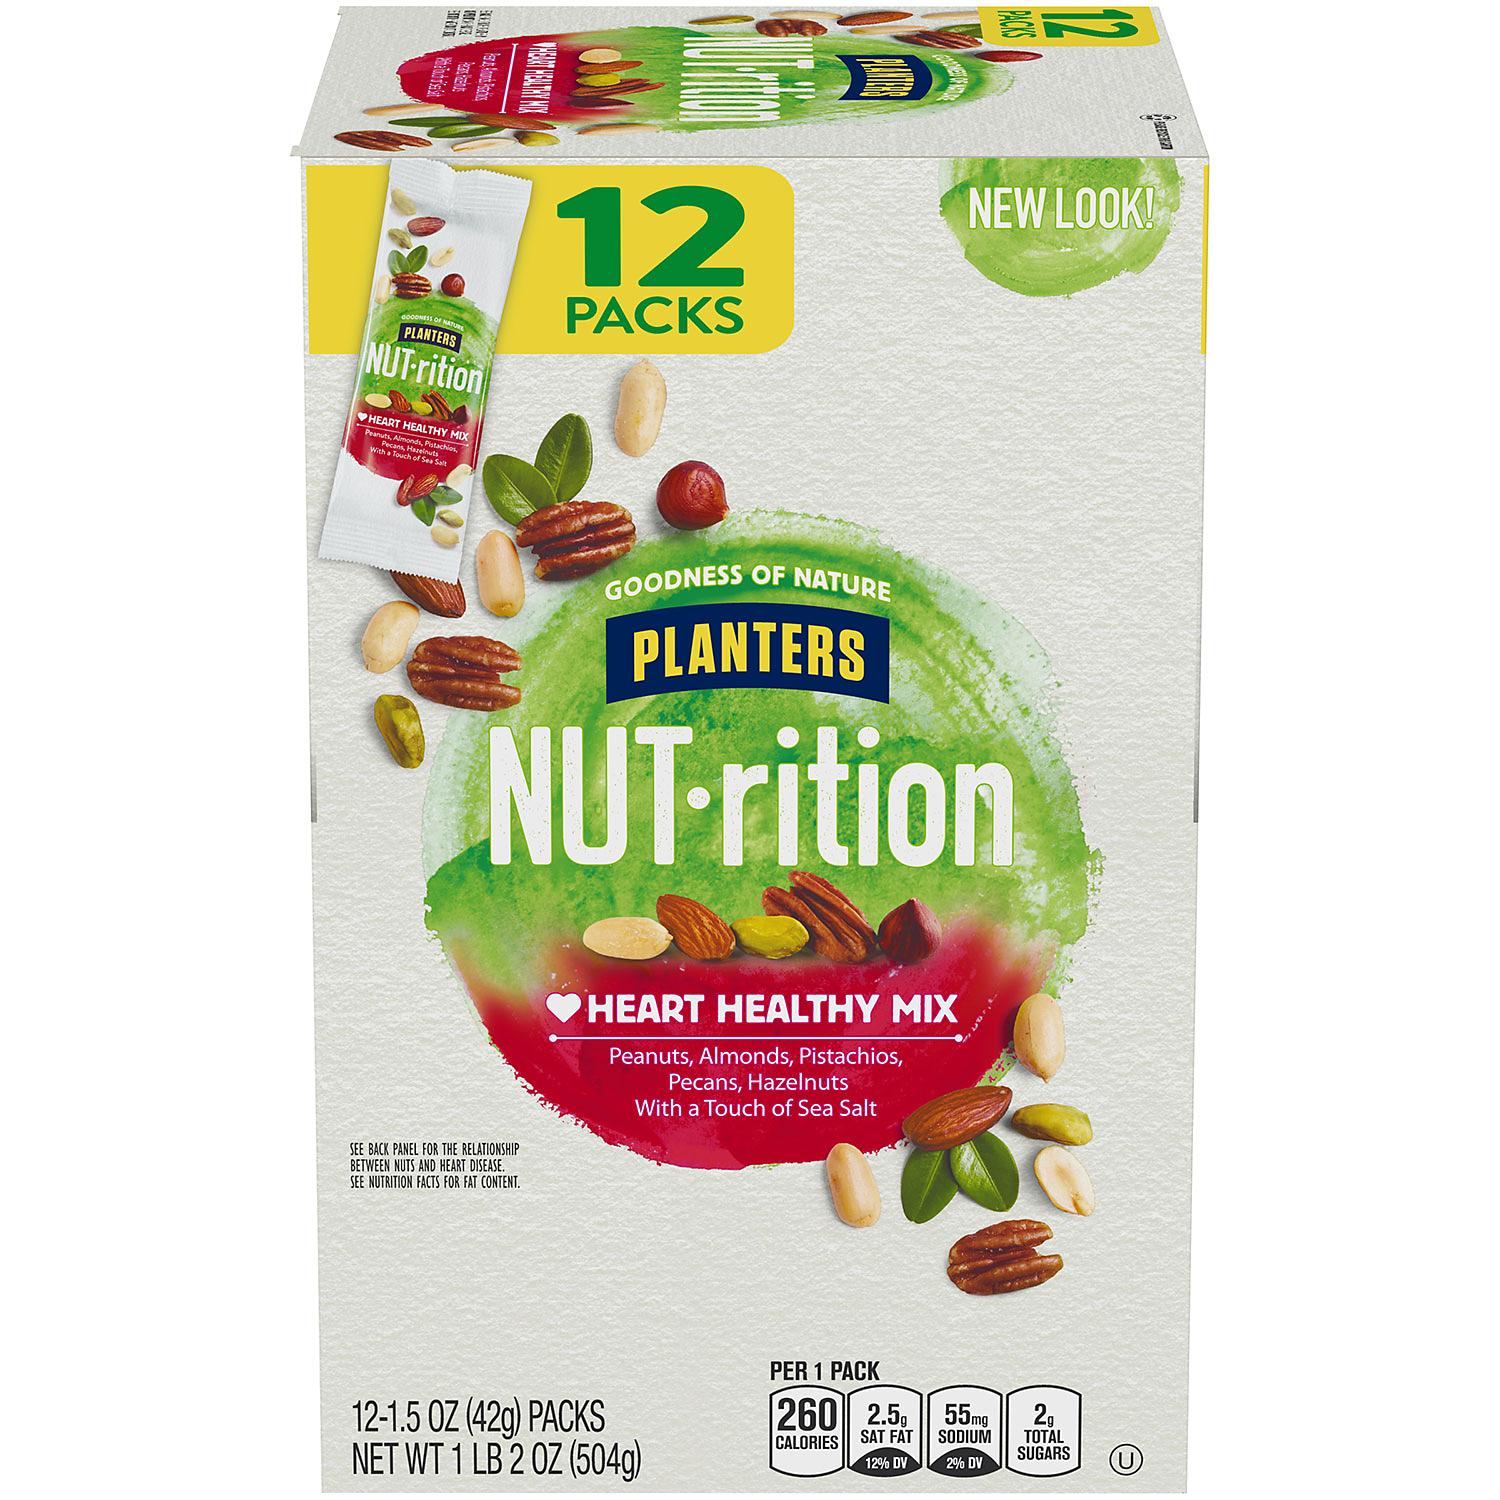 Planters NUT-rition Heart Healthy Mix, 1.5 Oz, 12 Ct